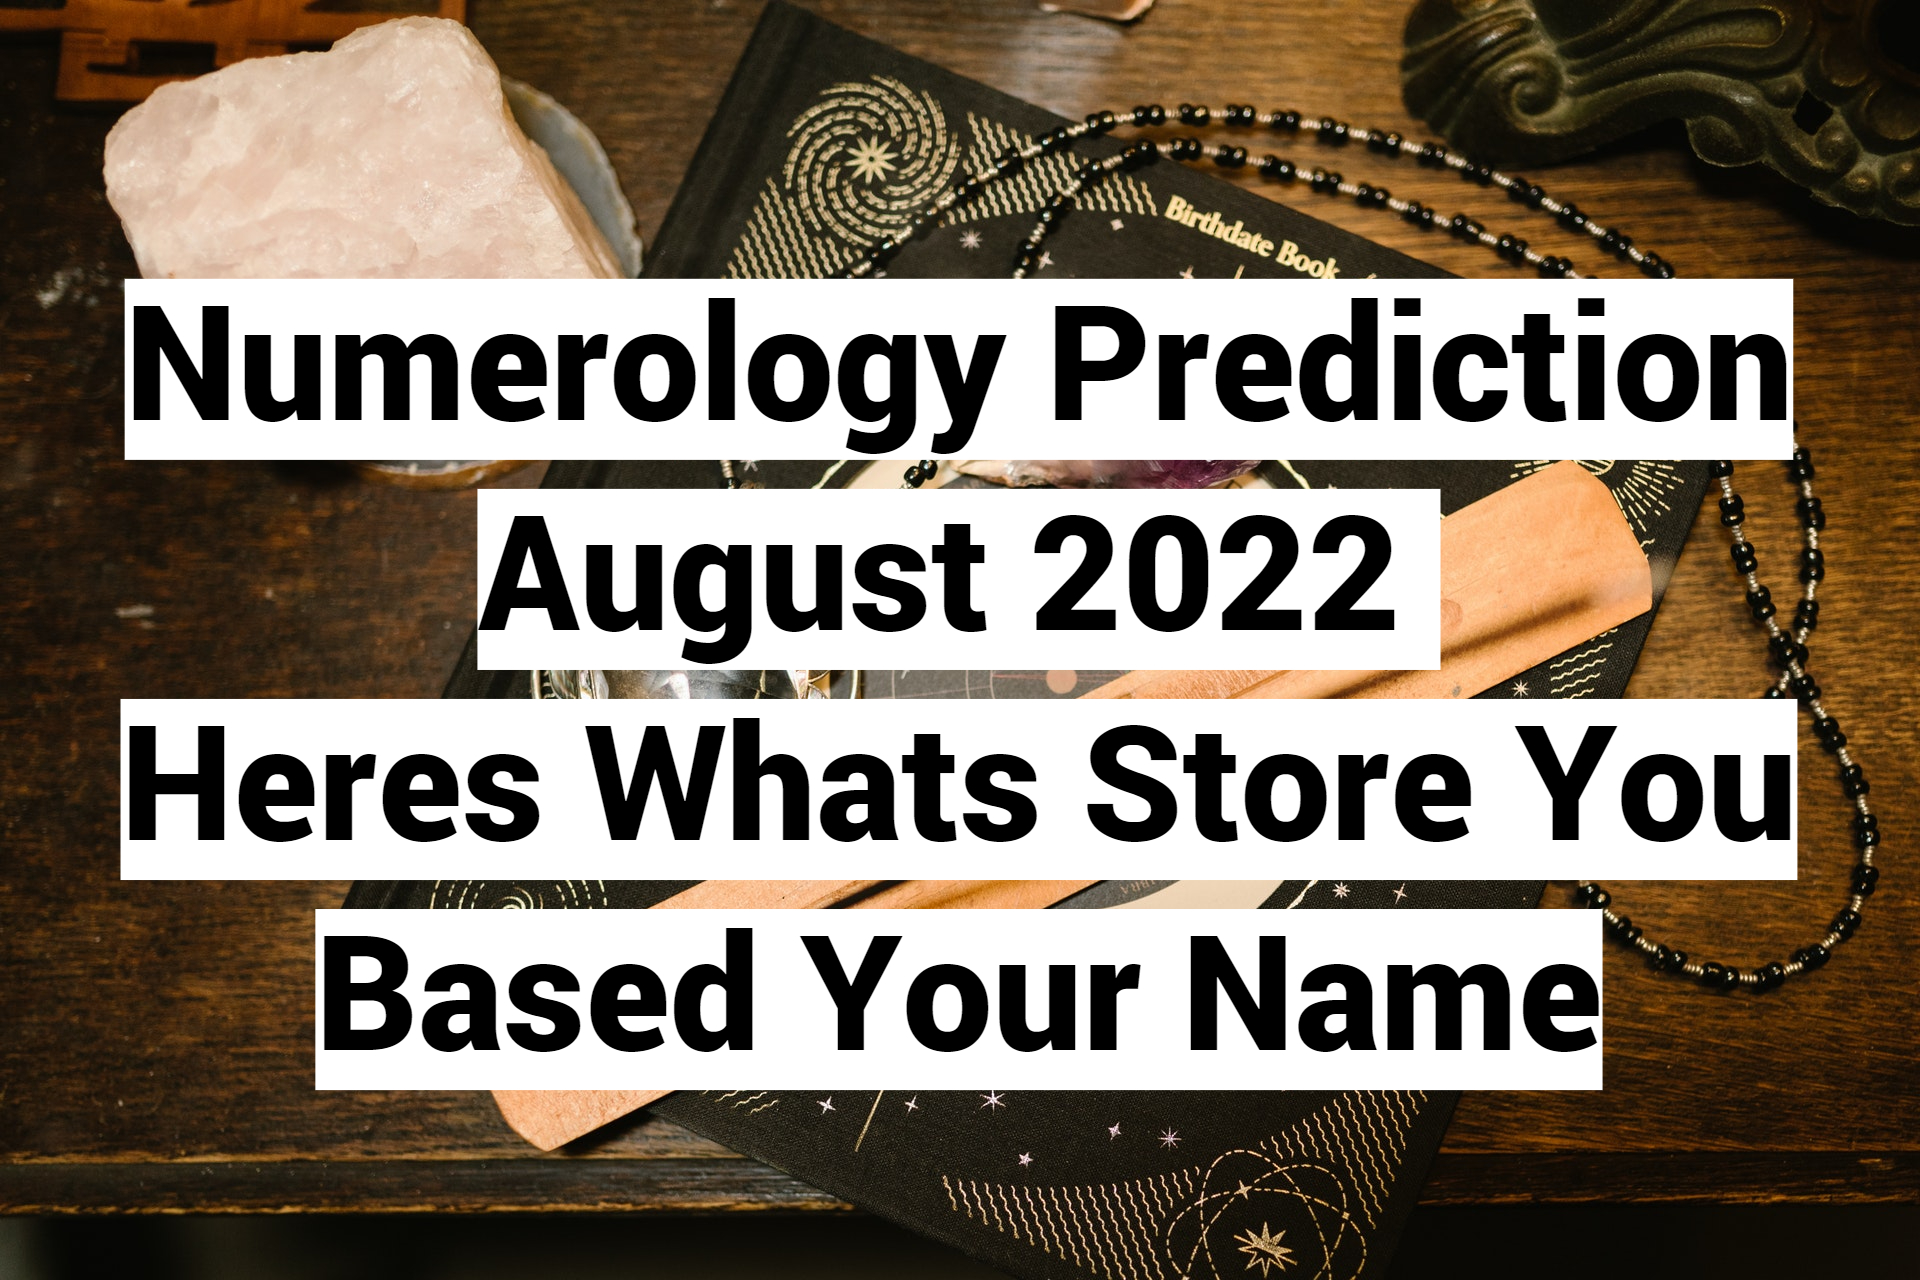 Numerology Prediction August 2022 Here's What's Store You Based Your Name